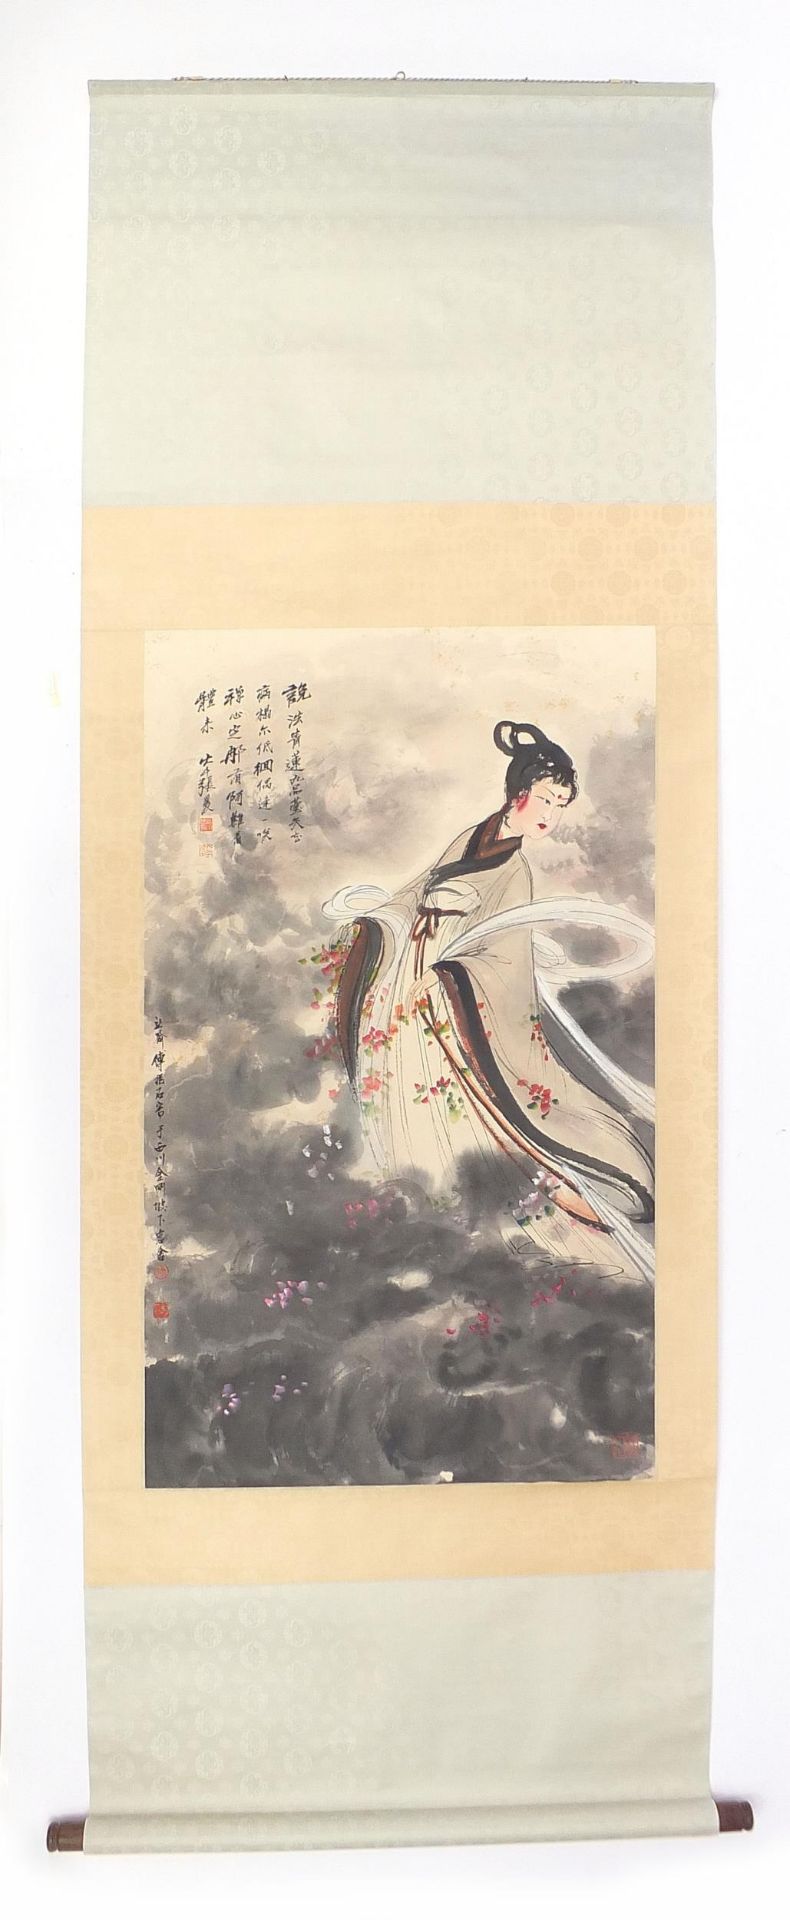 Attributed to Fu Baoshi - Female celestial spreading auspiciousness with inscribed poem attributed - Image 2 of 7